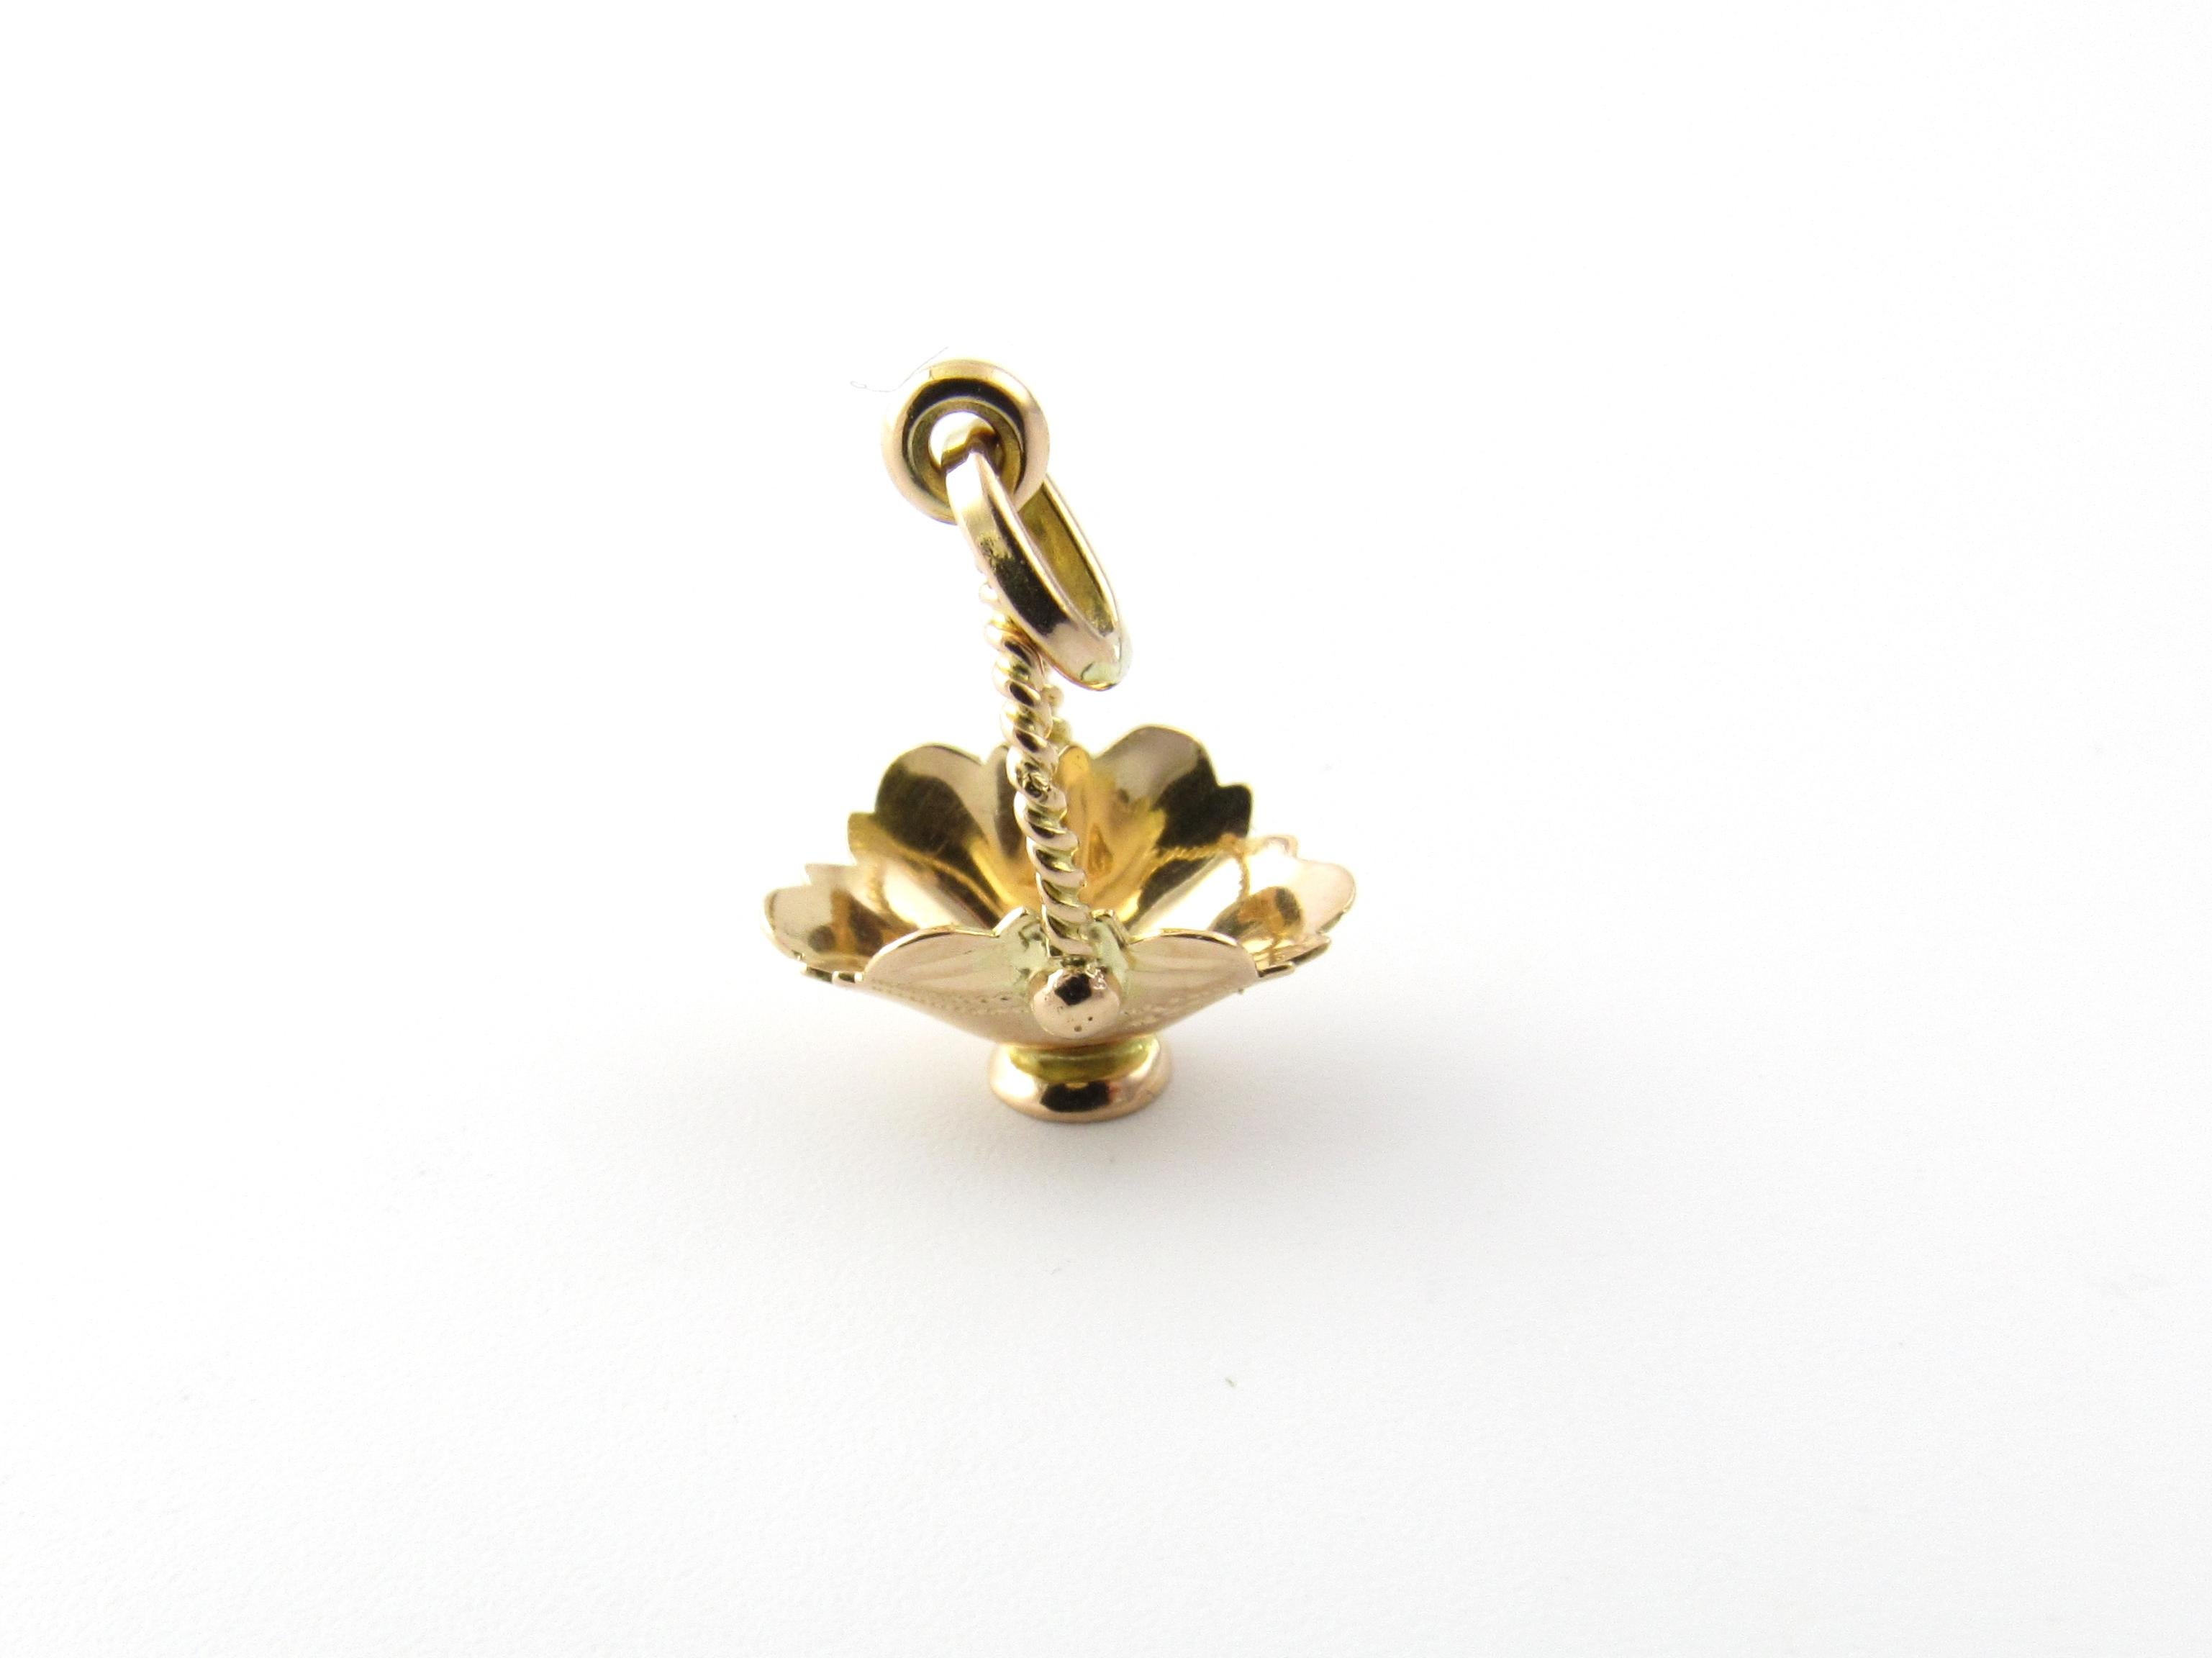 Vintage 18 Karat Yellow Gold Basket Charm

A tisket, a tasket!

This lovely 3D charm features a miniature basket beautifully detailed in 18K yellow gold.

Size: 18 mm x 14 mm (actual charm)

Weight: 0.8 dwt. / 1.3 gr.

Stamped: 750

Very good